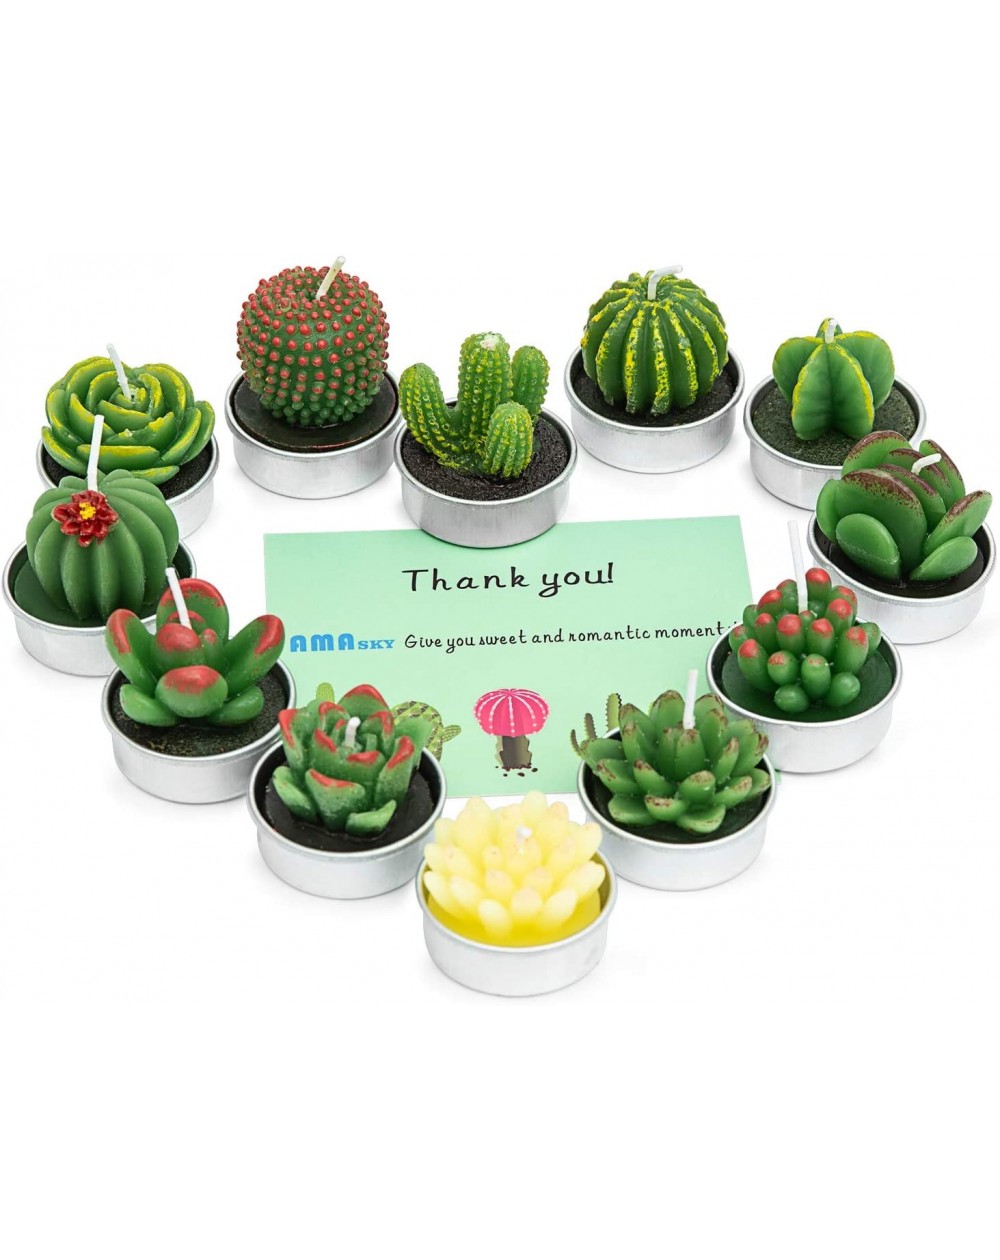 Birthday Candles Handmade Delicate Succulent Cactus Candles for Birthday Party Wedding Spa Home Decoration- 12 Pcs in Pack. -...